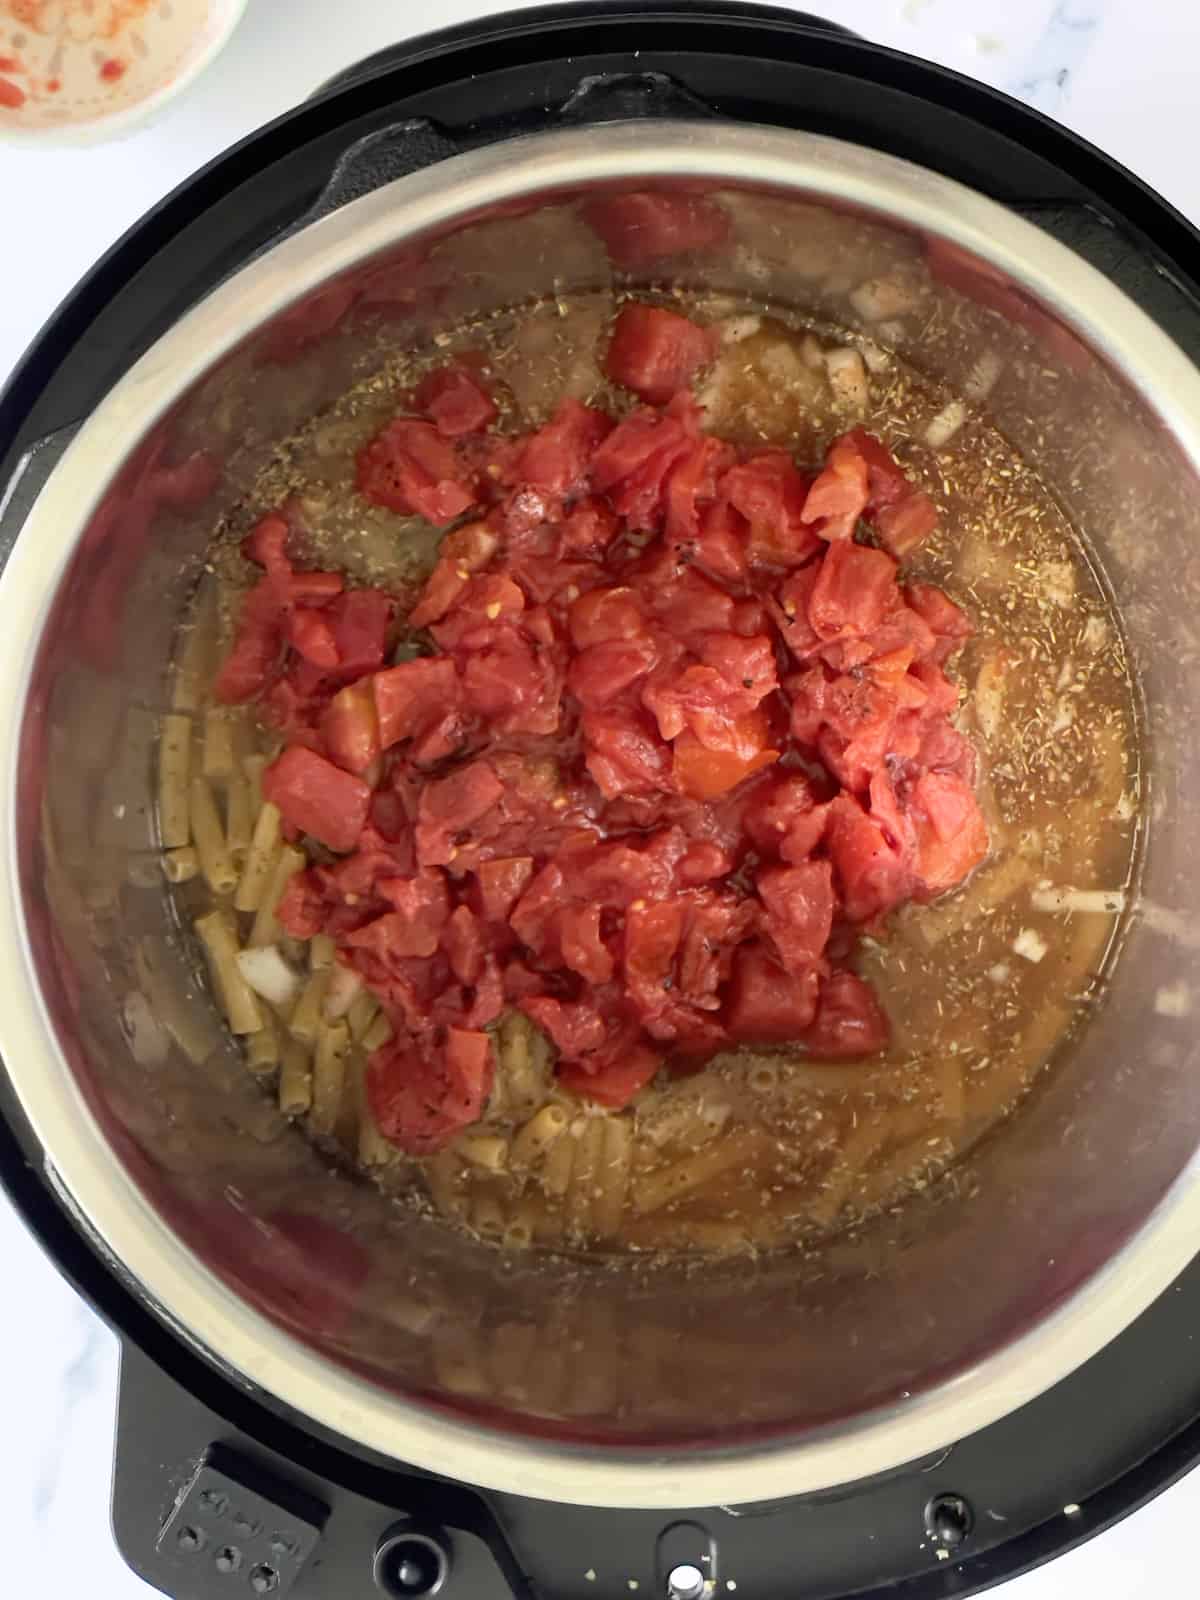 fire roasted tomatoes added on top of pasta in the inner pot